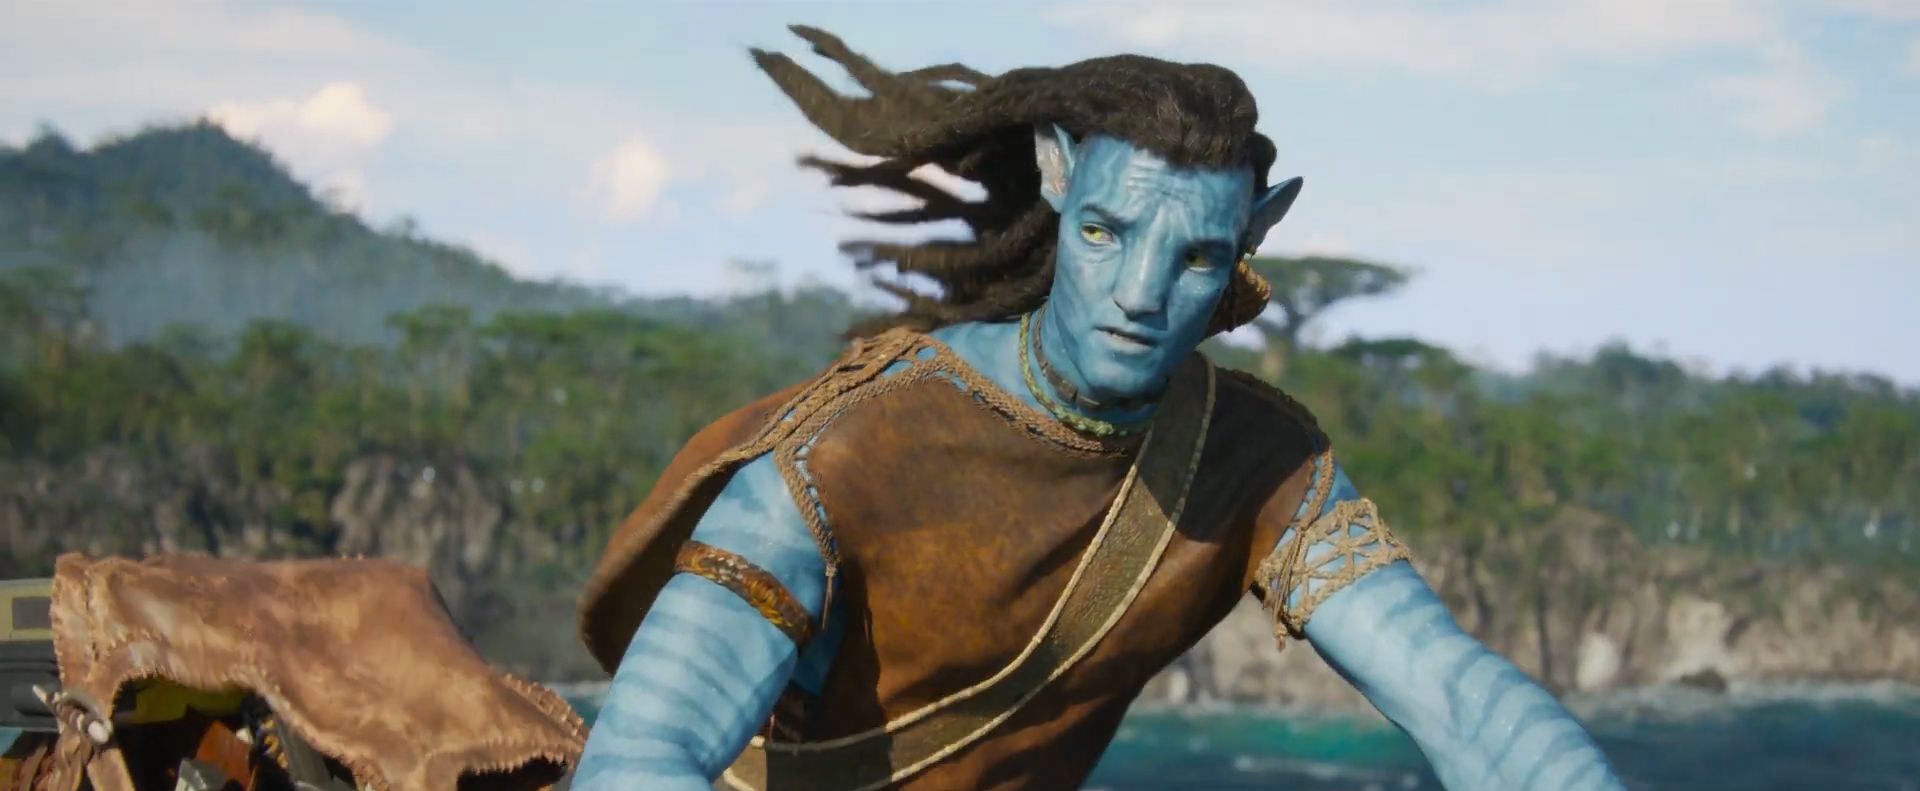 How to watch Avatar 2 on Disney Plus right now